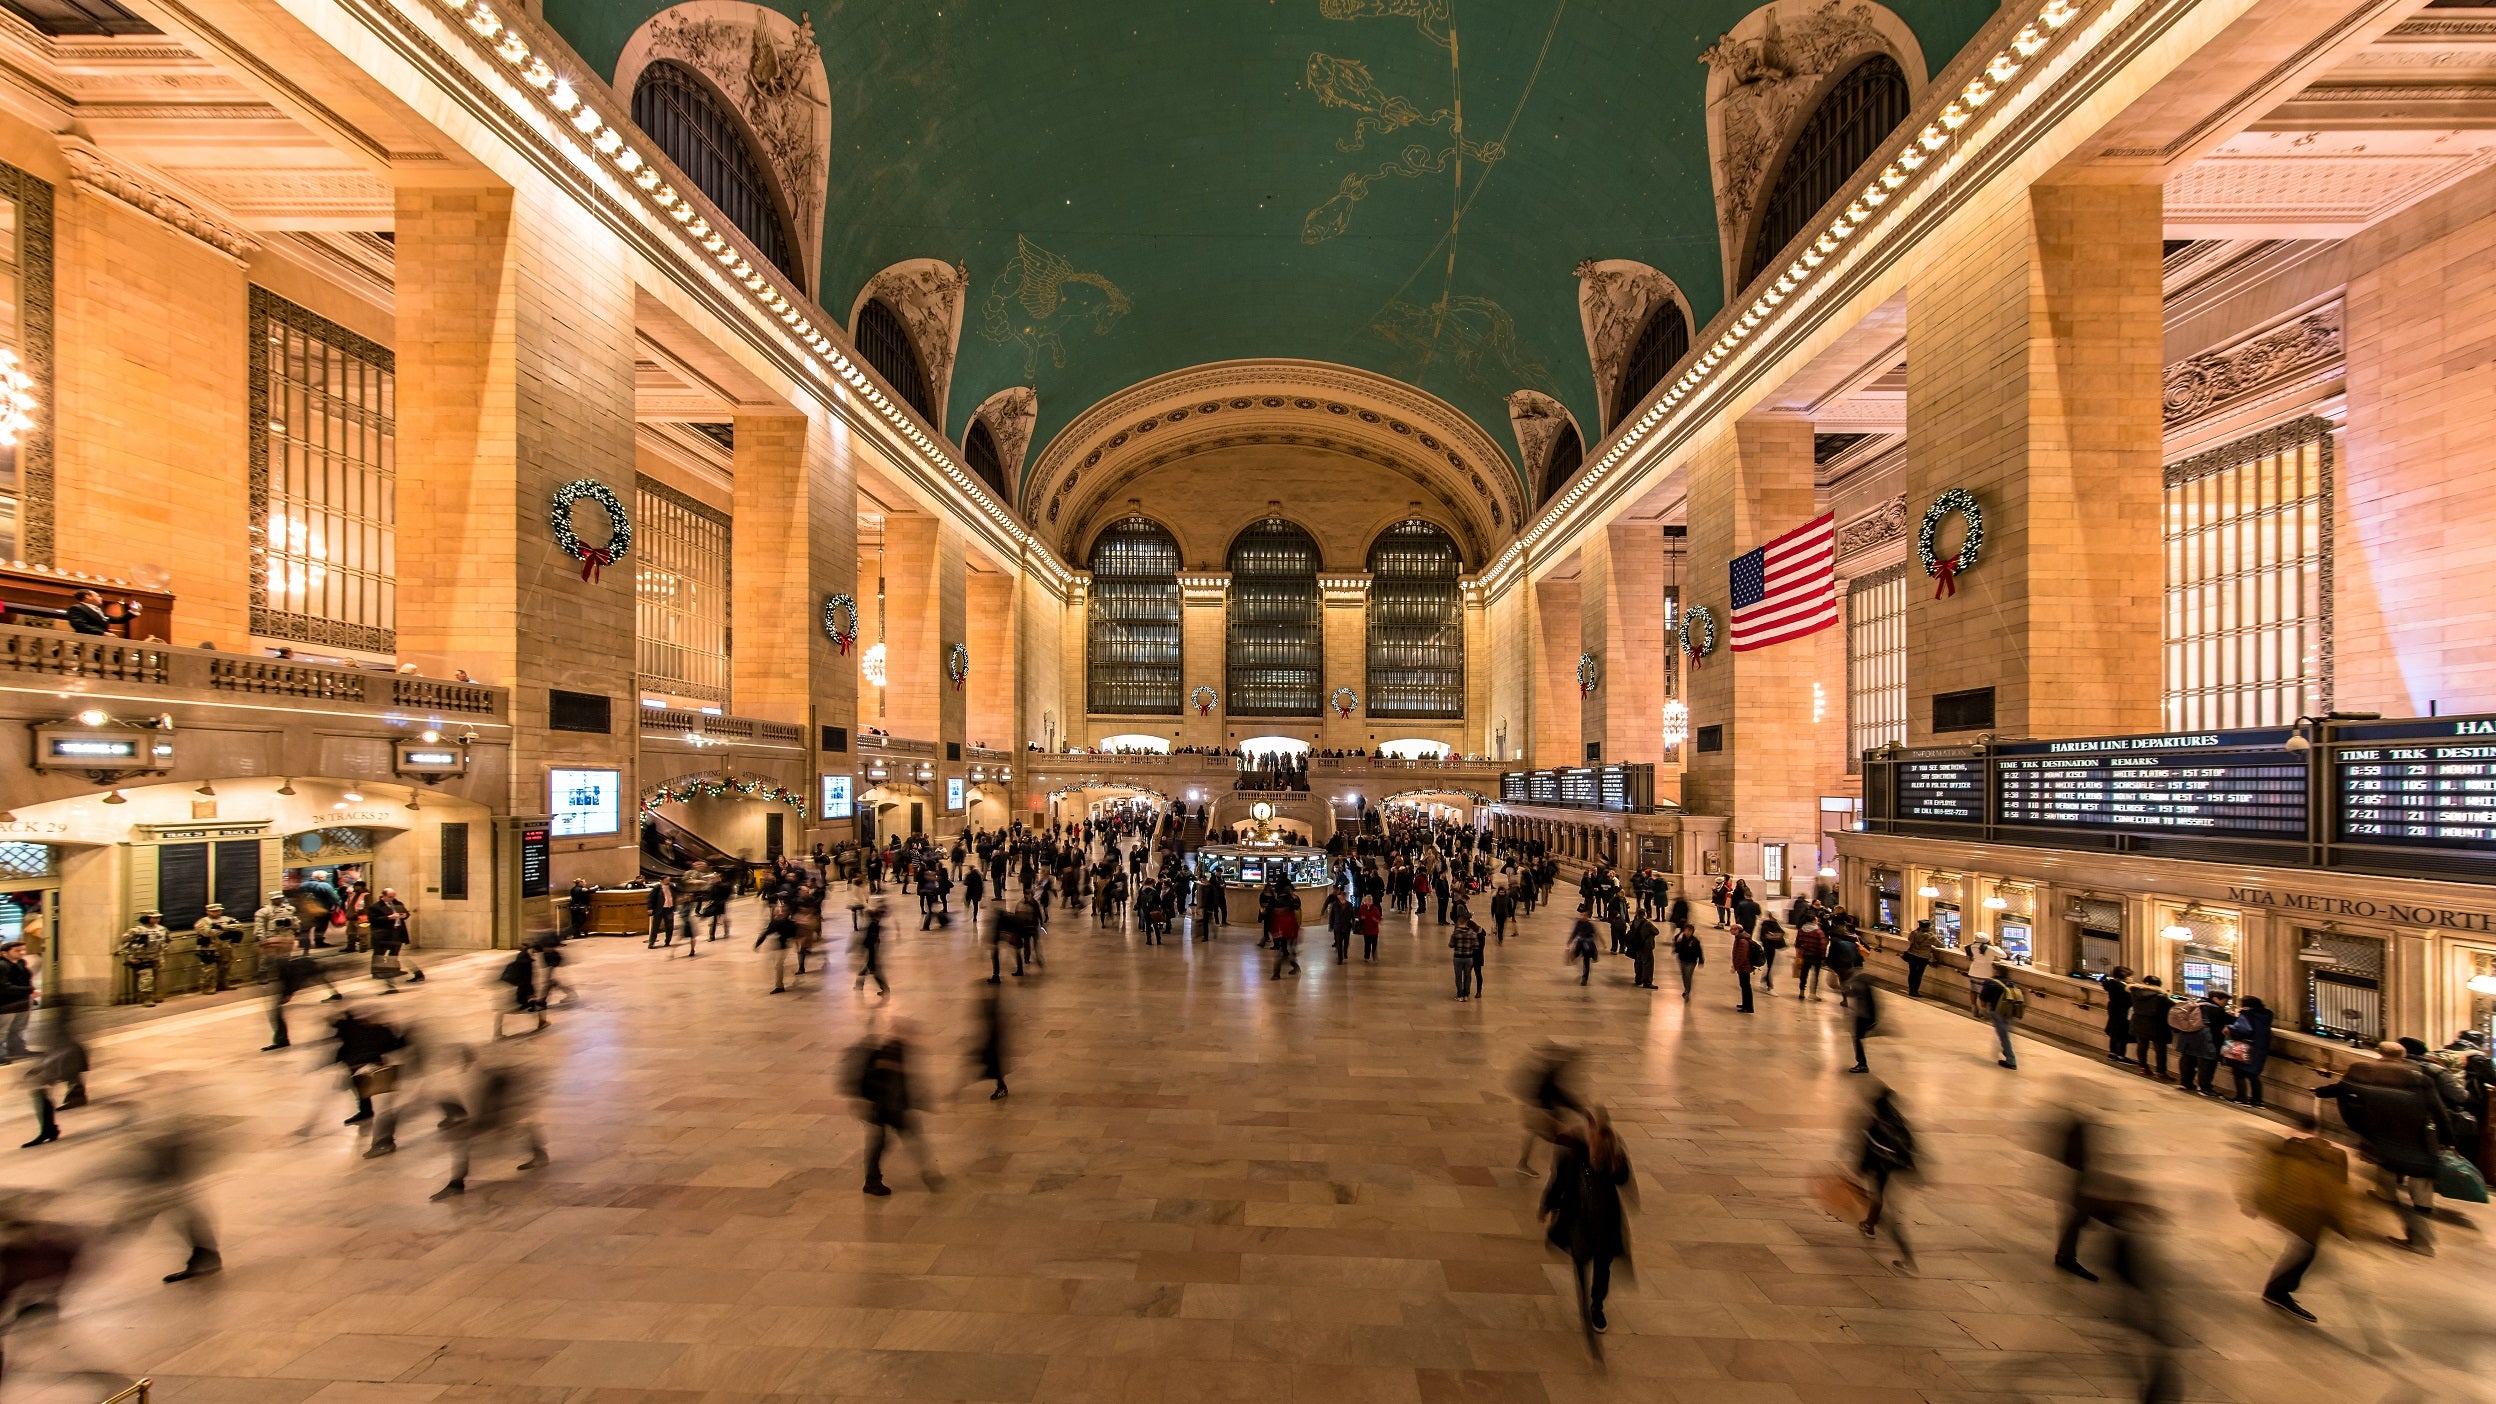 Dozens of rush hour patrons walk through grand central station in New York City.